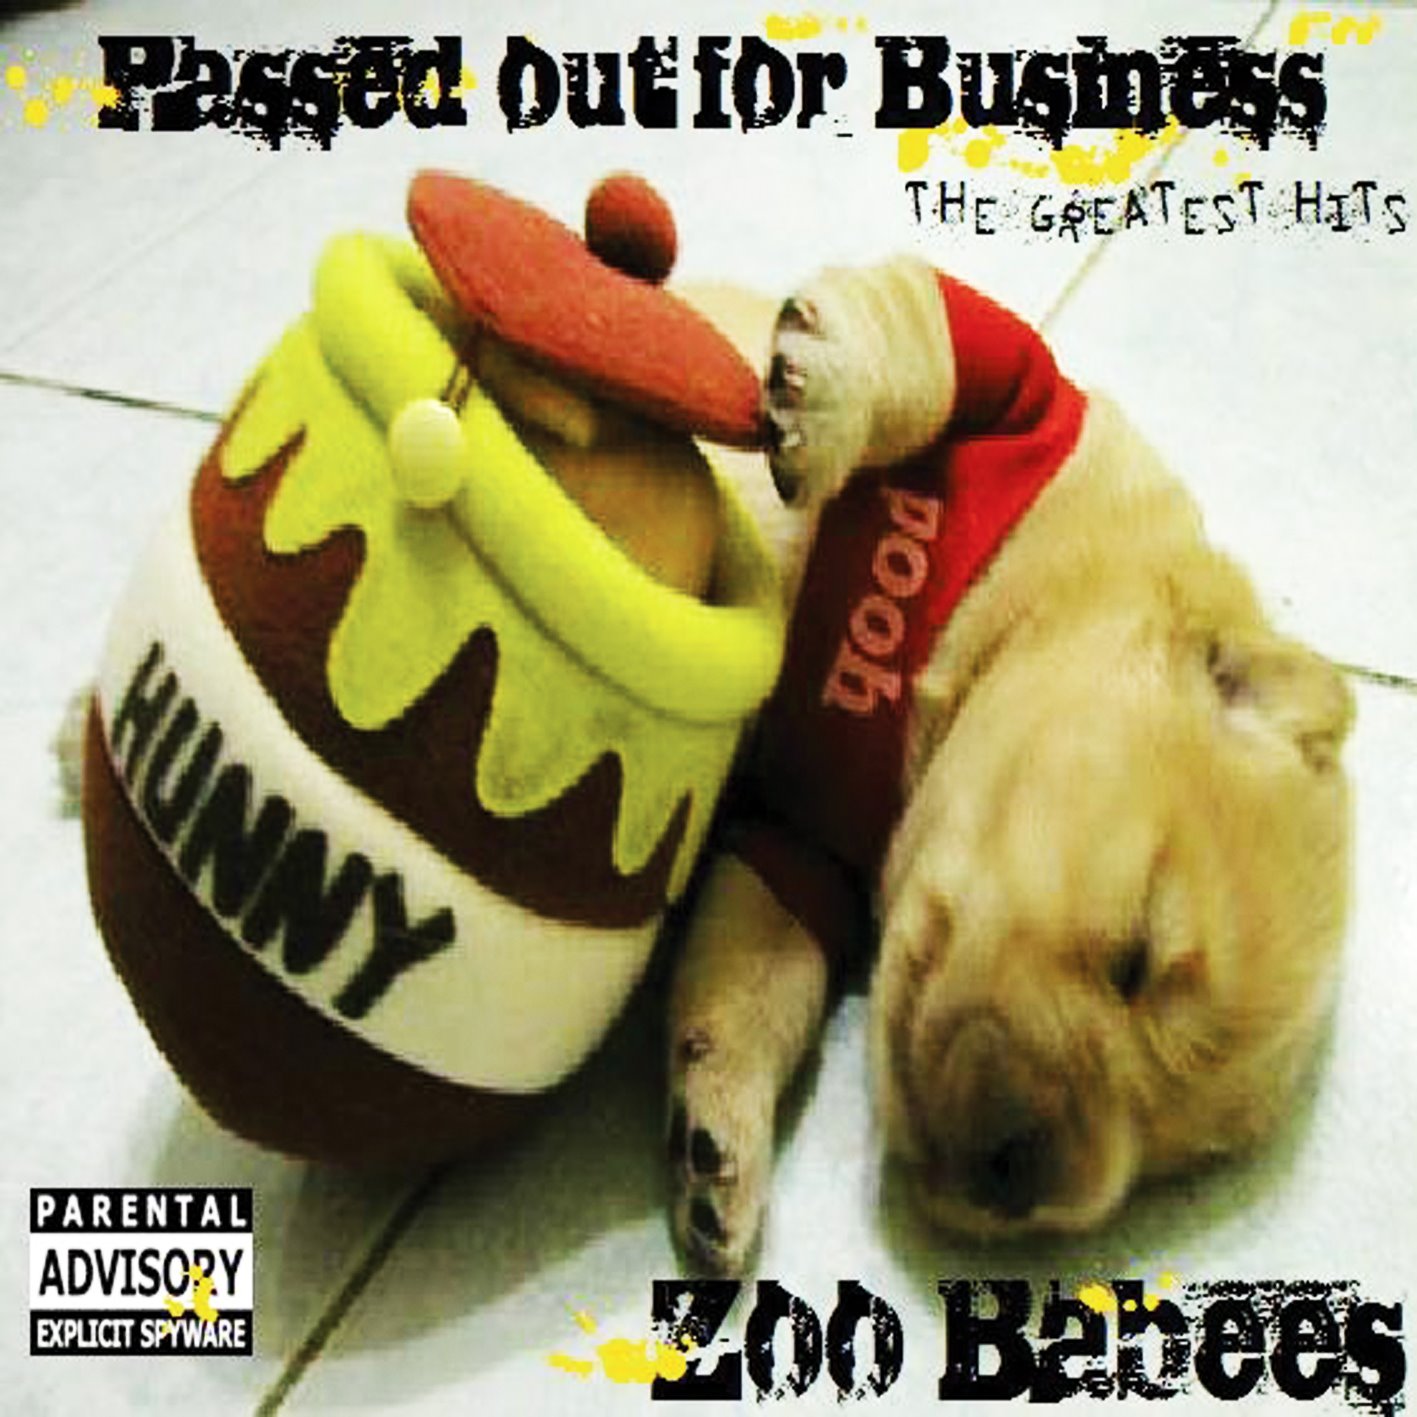 [ZOO+BABEES+-+PASSED+OUT+FOR+BUSINESS.jpg]